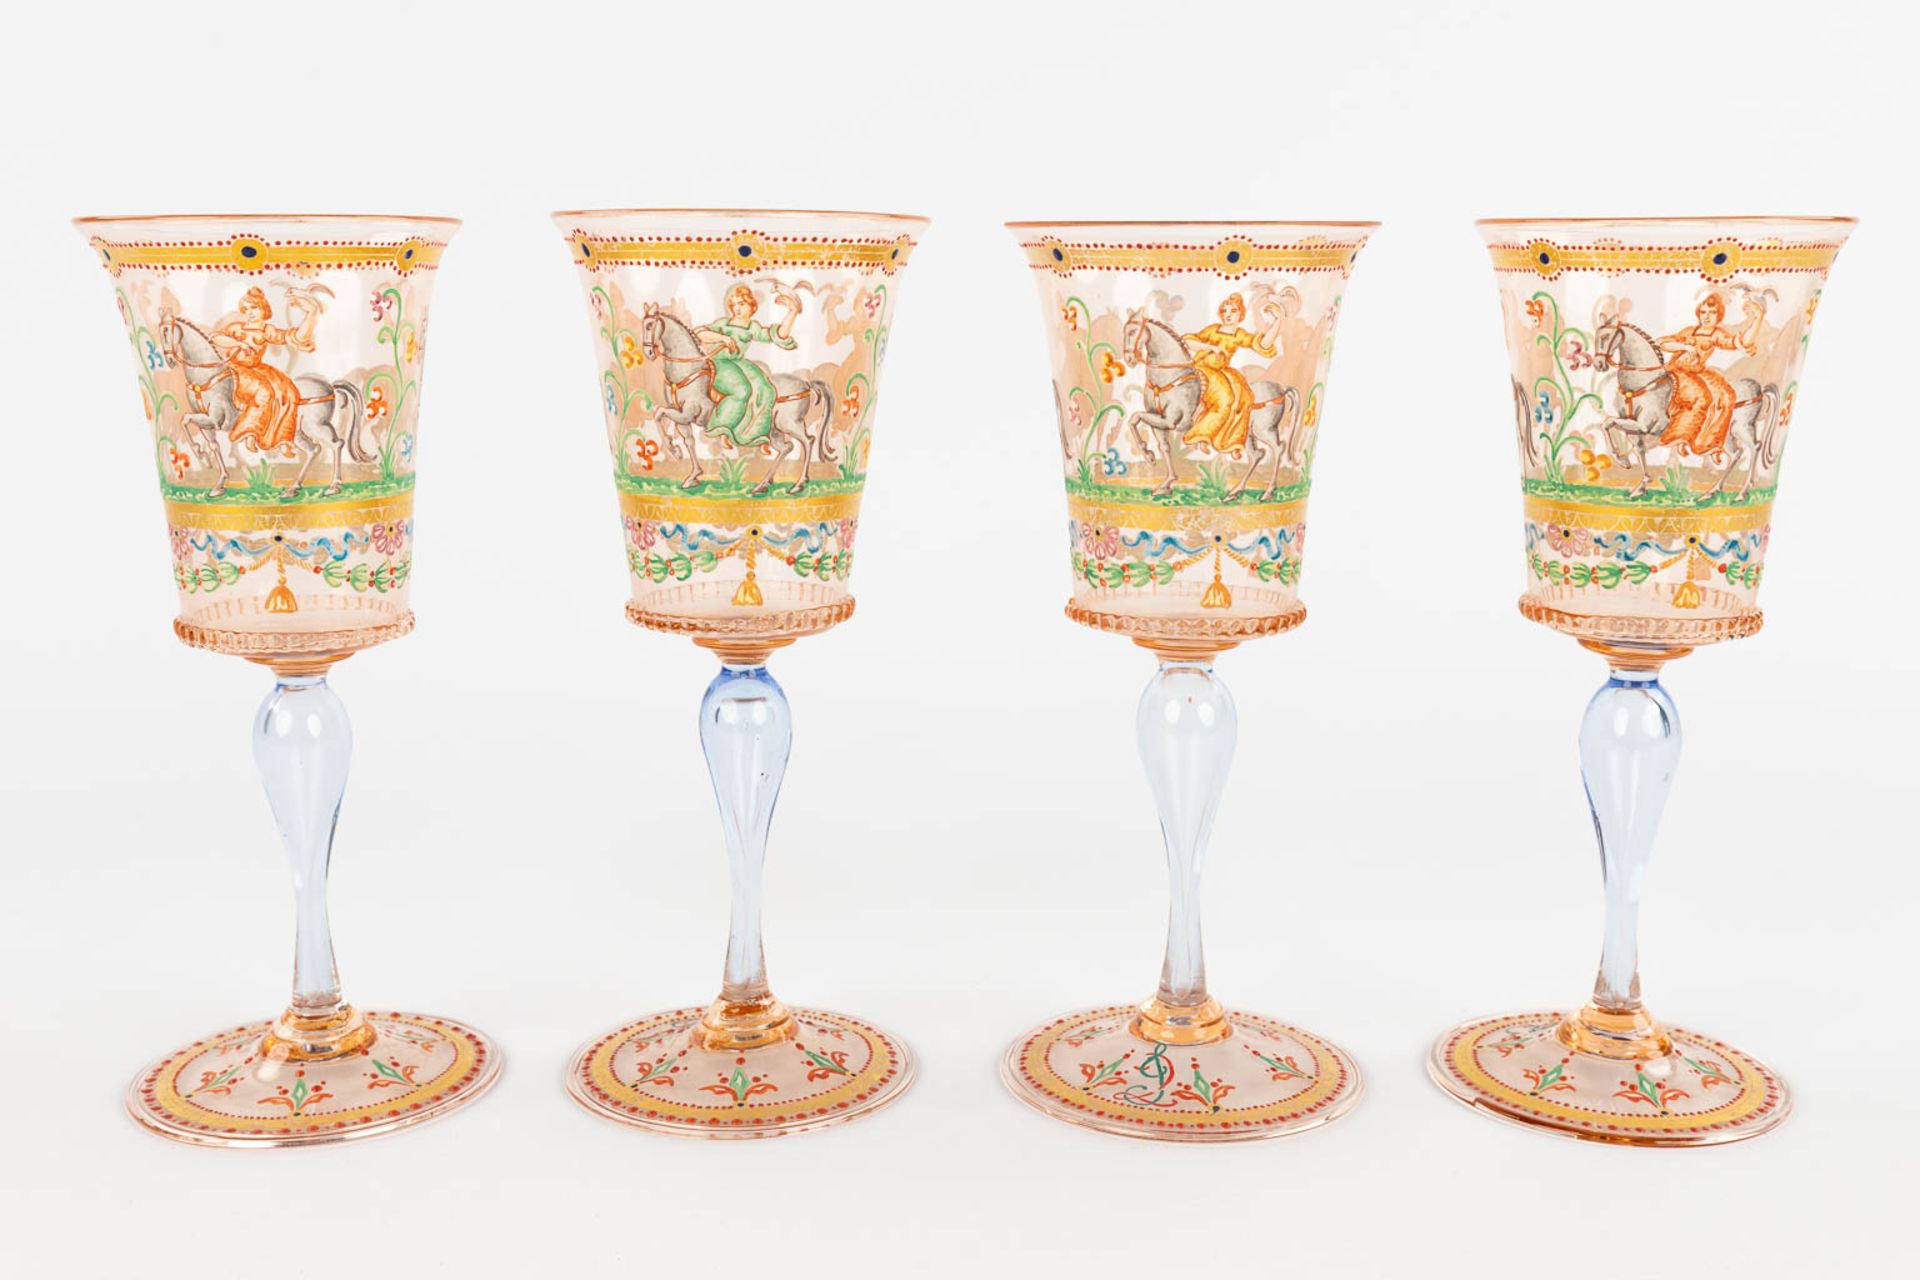 A set of 4 hand-painted and antique goblets, Murano, Salviati, 19th C. (H:17 x D:7 cm) - Image 3 of 16